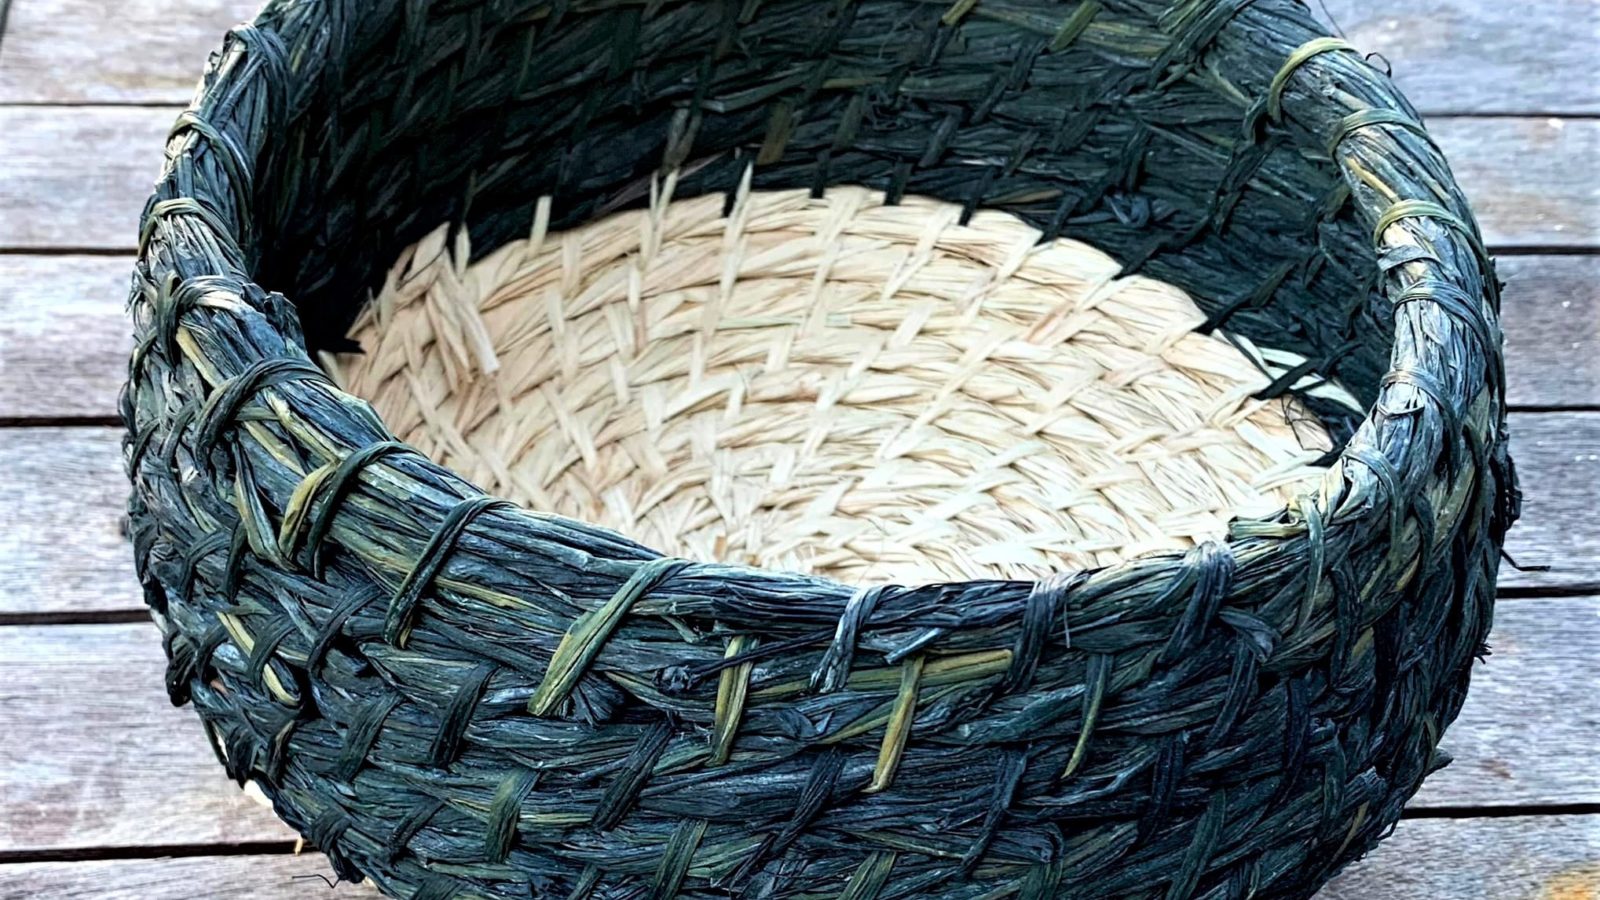 Woven basket with natural dyes